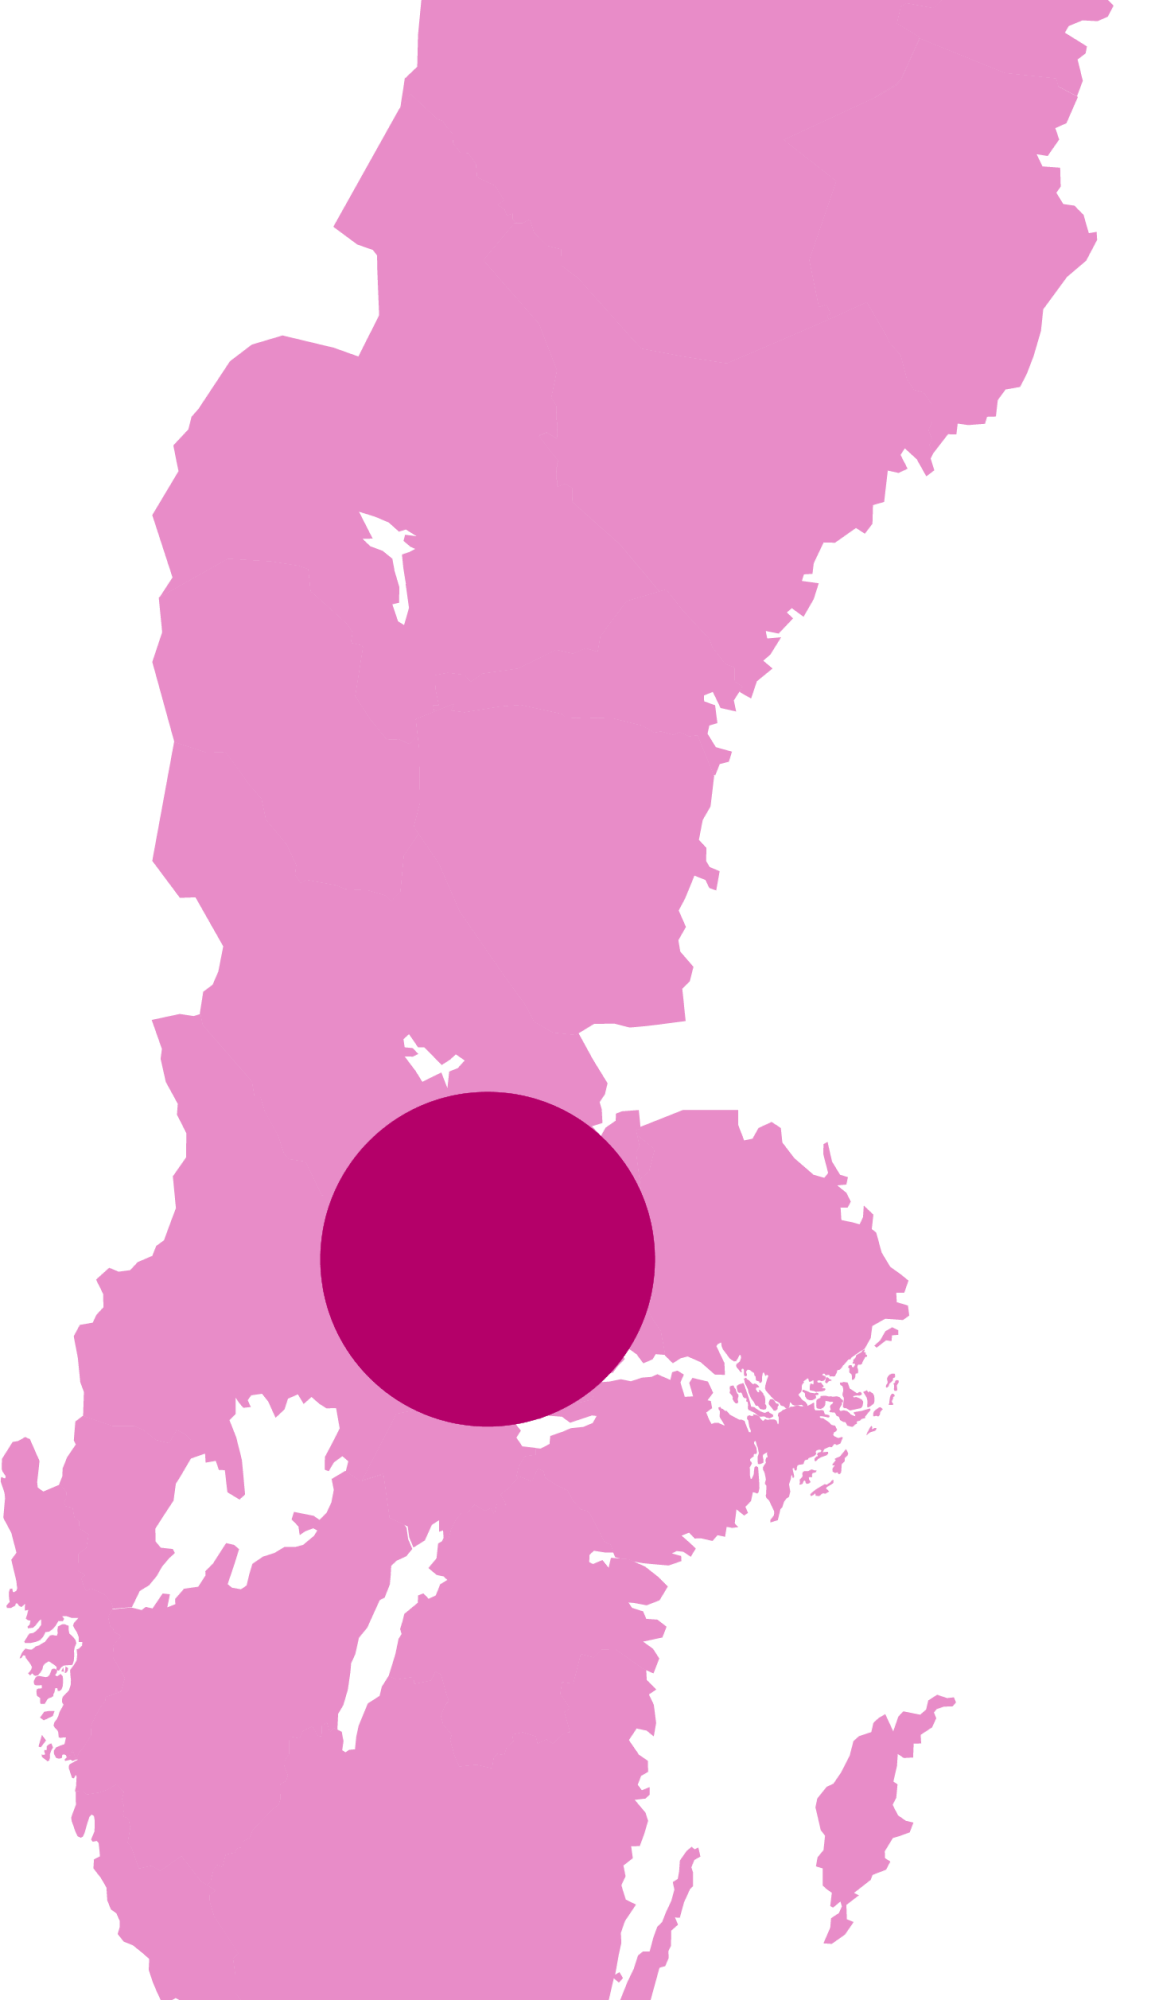 Map of Sweden with Bergslagen marked with a circle